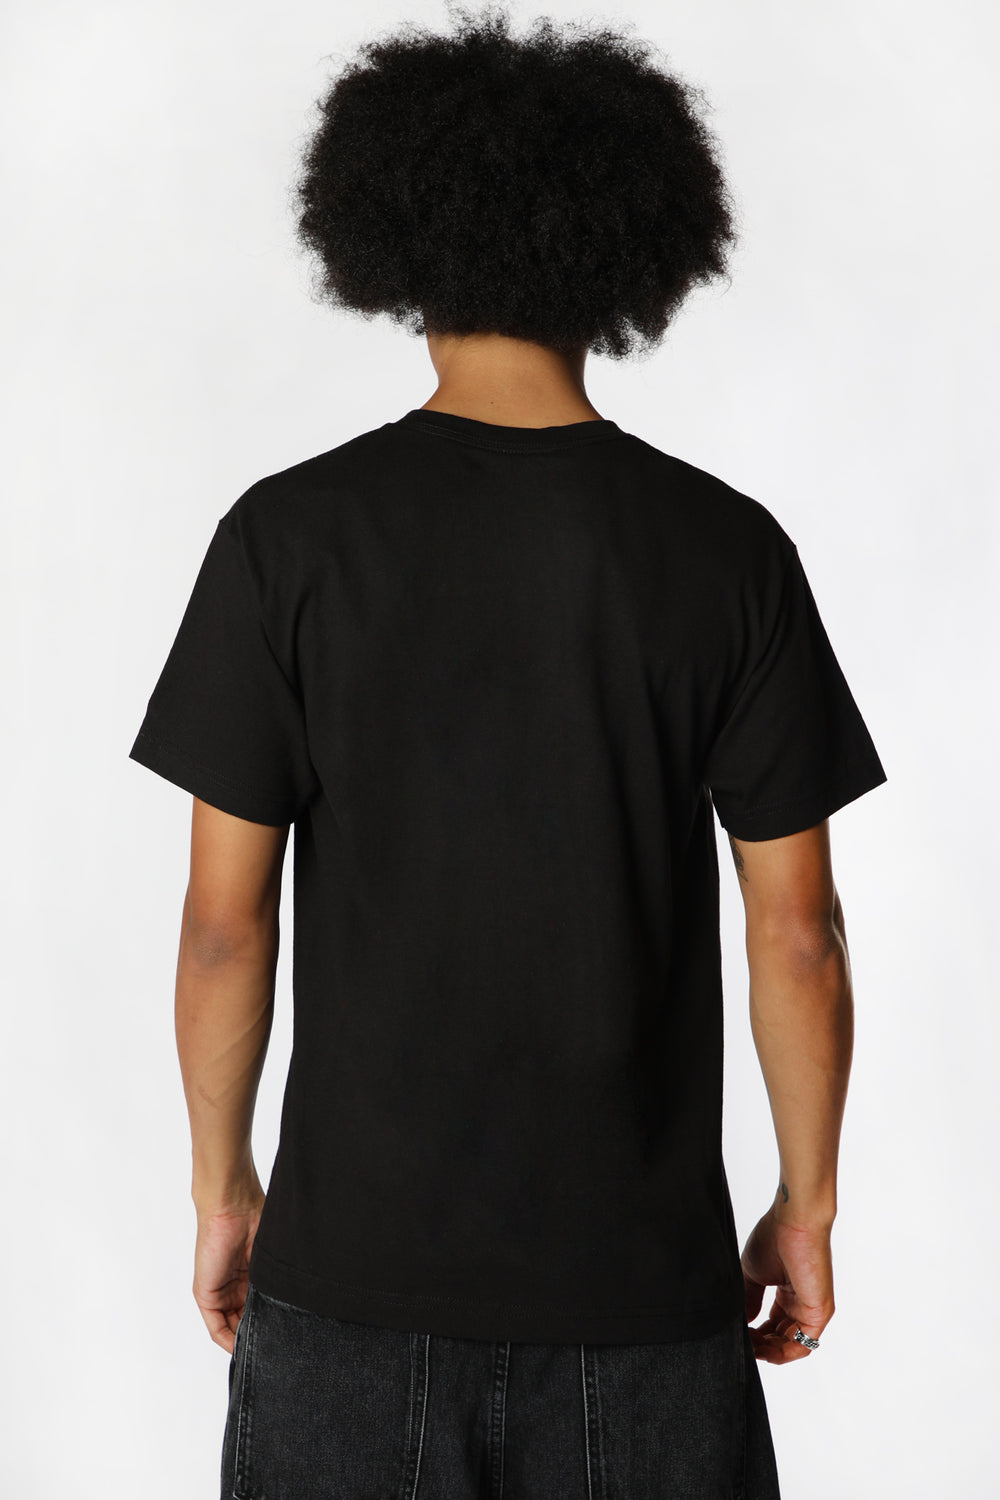 Grizzly Neon Trail T-Shirt Black